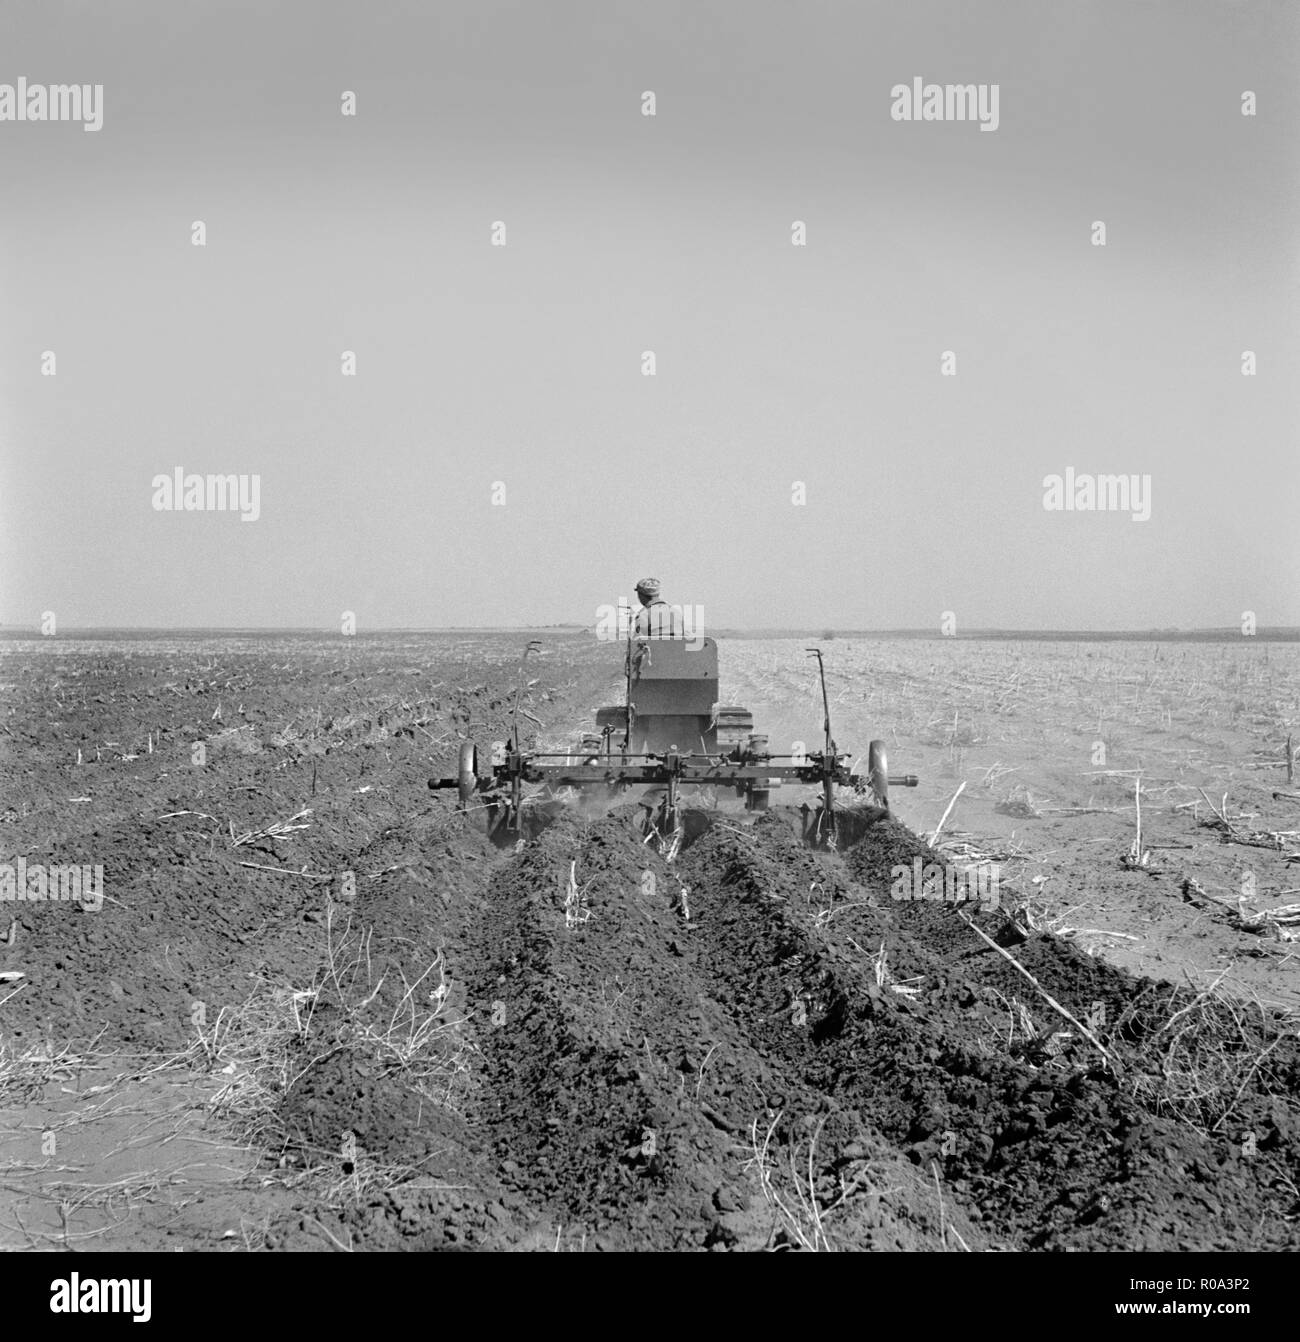 Farmer Listing his Field under Wind Erosion Control Program, Receiving 20 cents per Acre for his Work, Liberal, Kansas, USA, Arthur Rothstein, Farm Security Administration, March 1936 Stock Photo